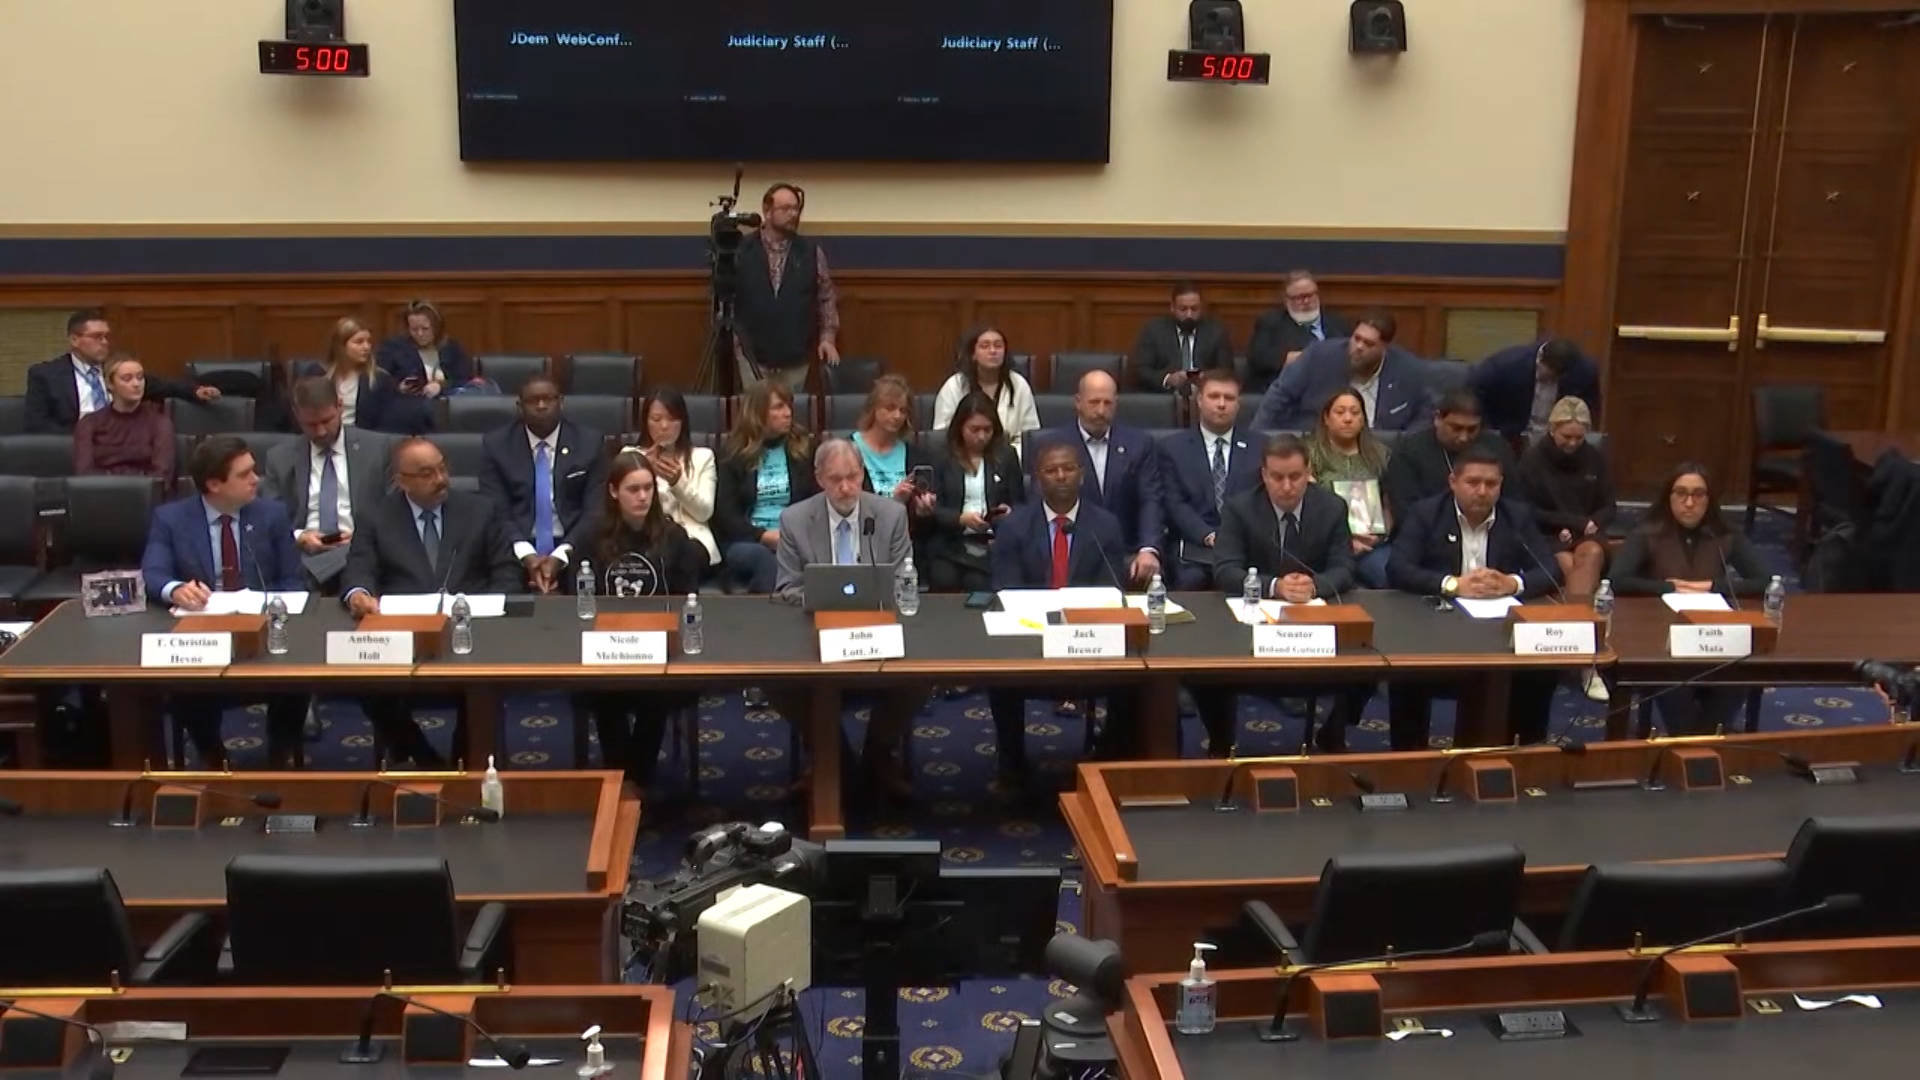 Relatives of the victims of the Uvalde massacre testify before the US House of Representatives and criticize the inadequate response of the police